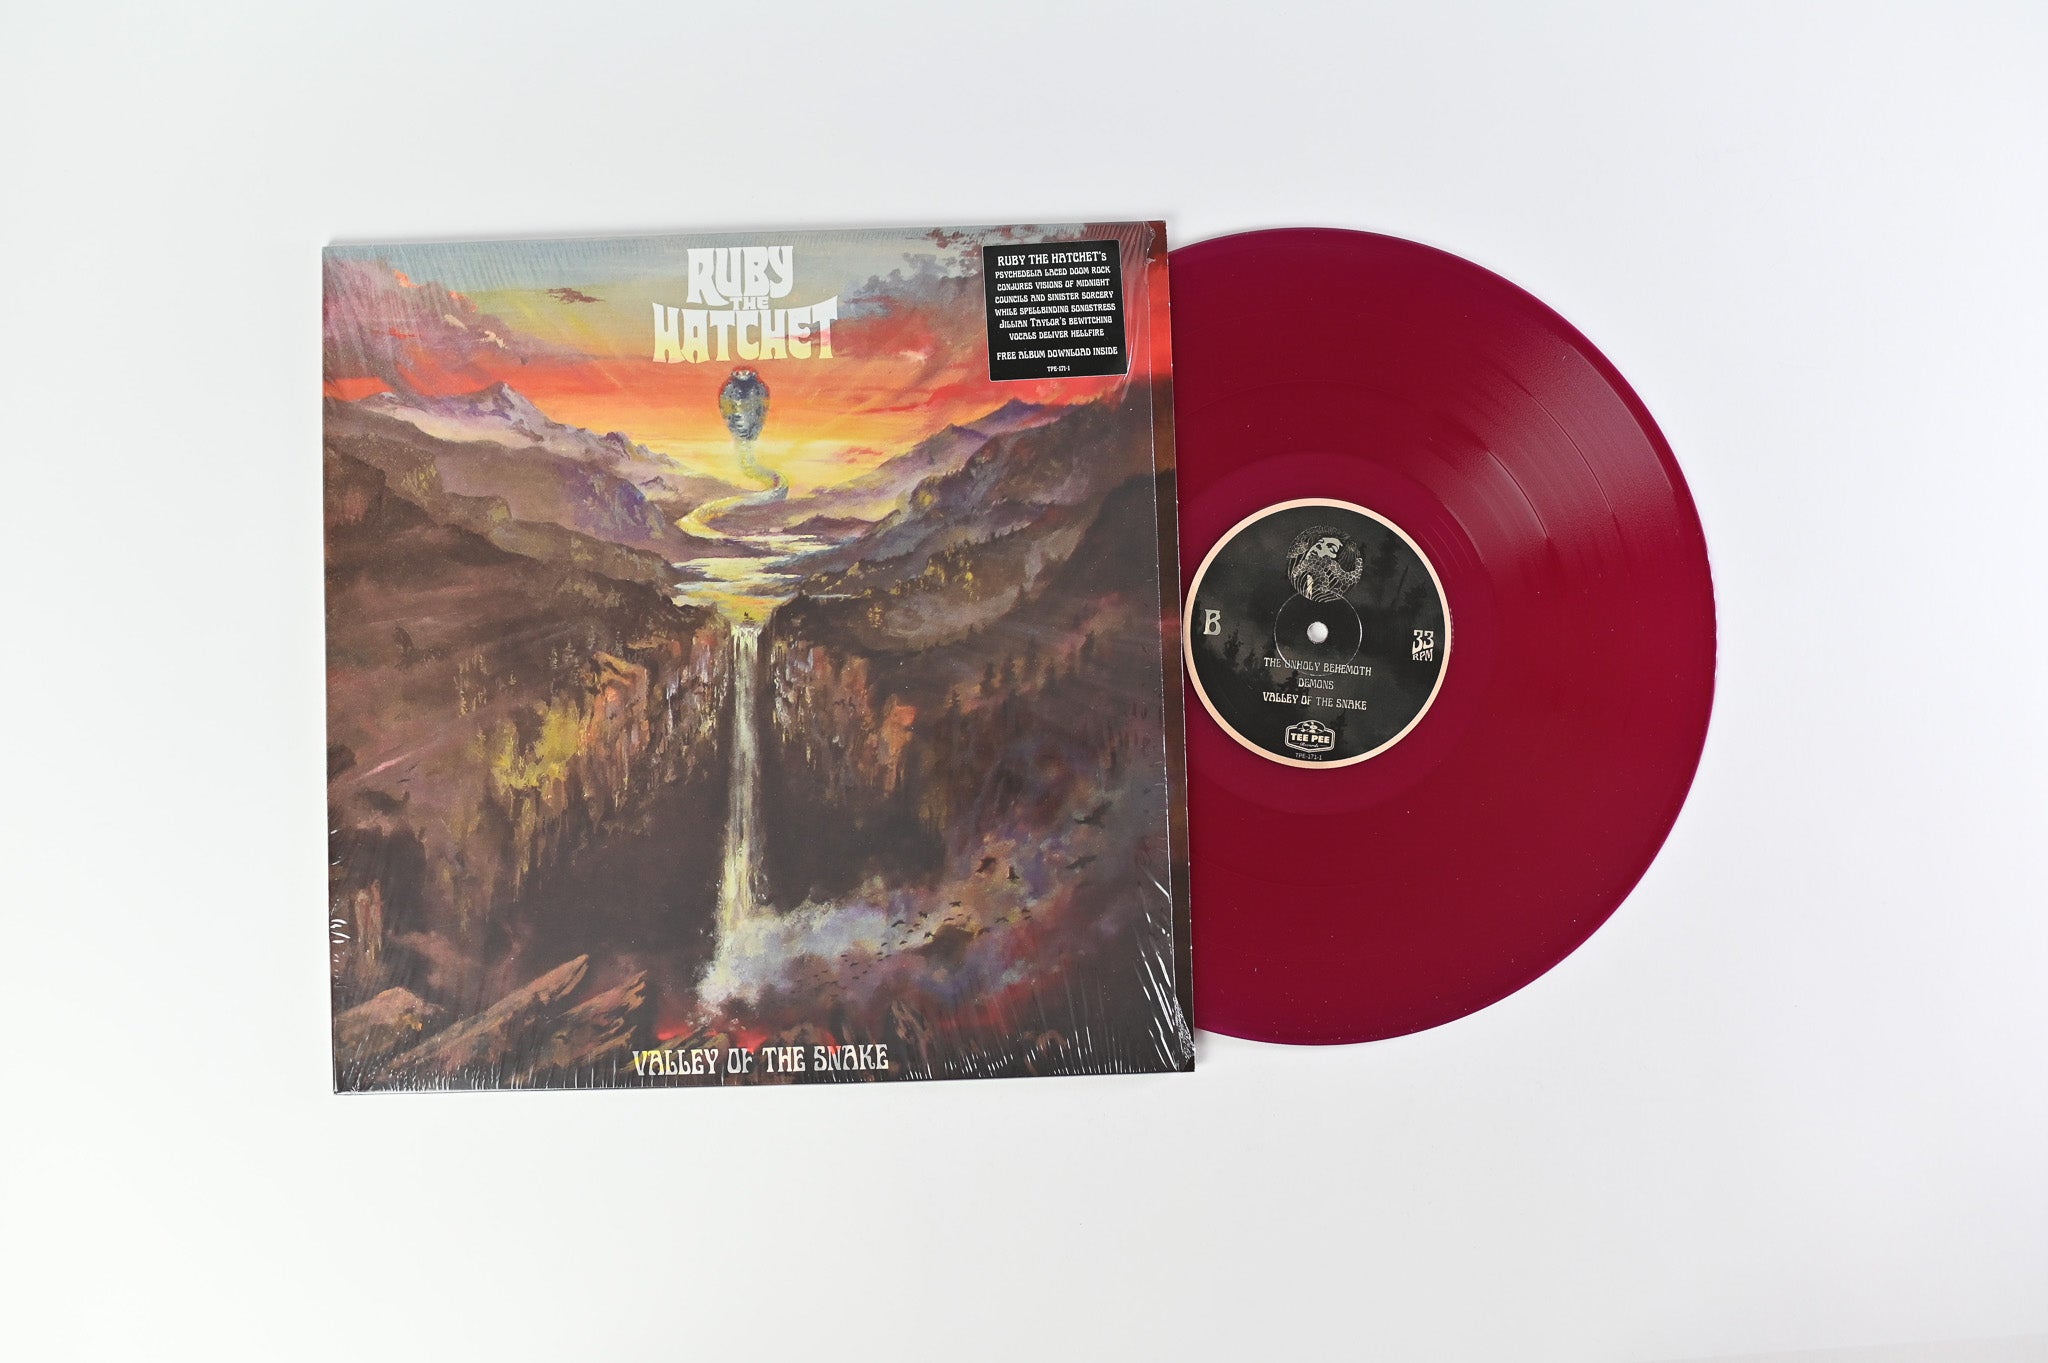 Ruby The Hatchet - Valley Of The Snake on Tee Pee Records - Purple Vinyl